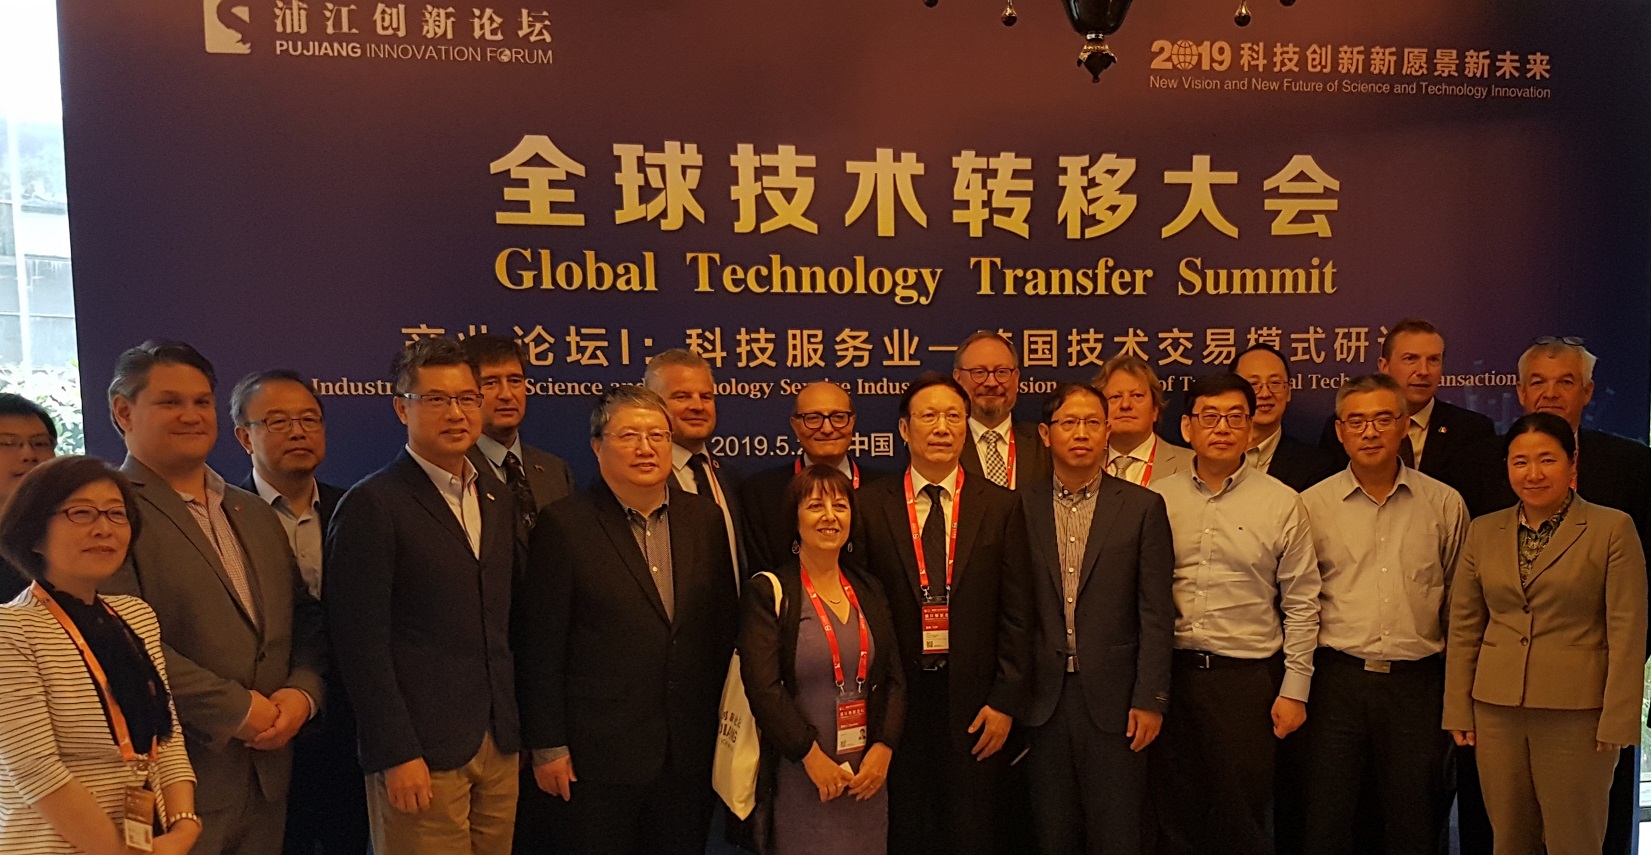 Carmel at the Global Technology Transfer Summit 2019